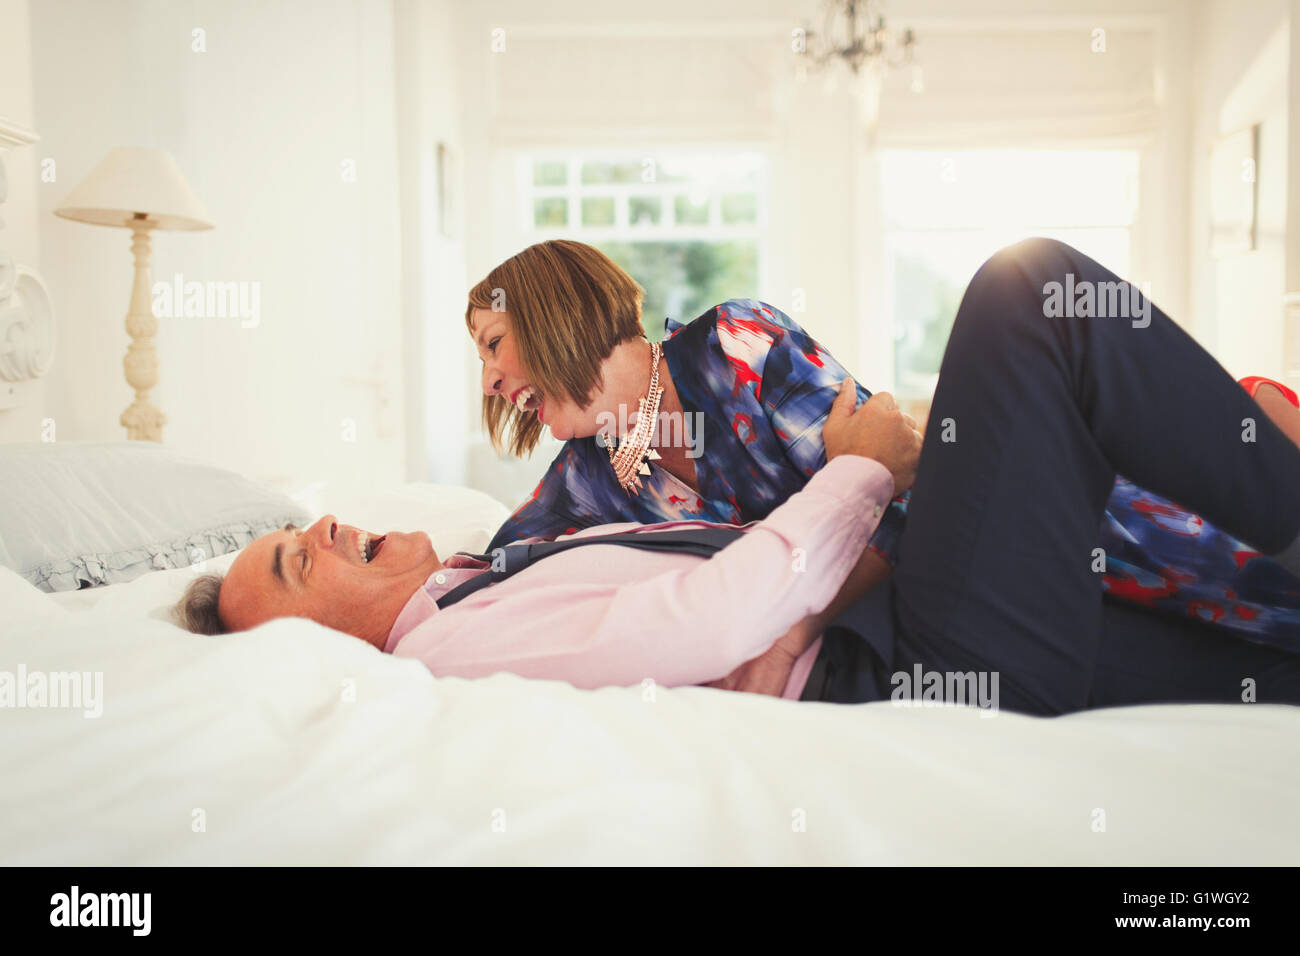 Well-dressed mature couple laughing on bed Stock Photo